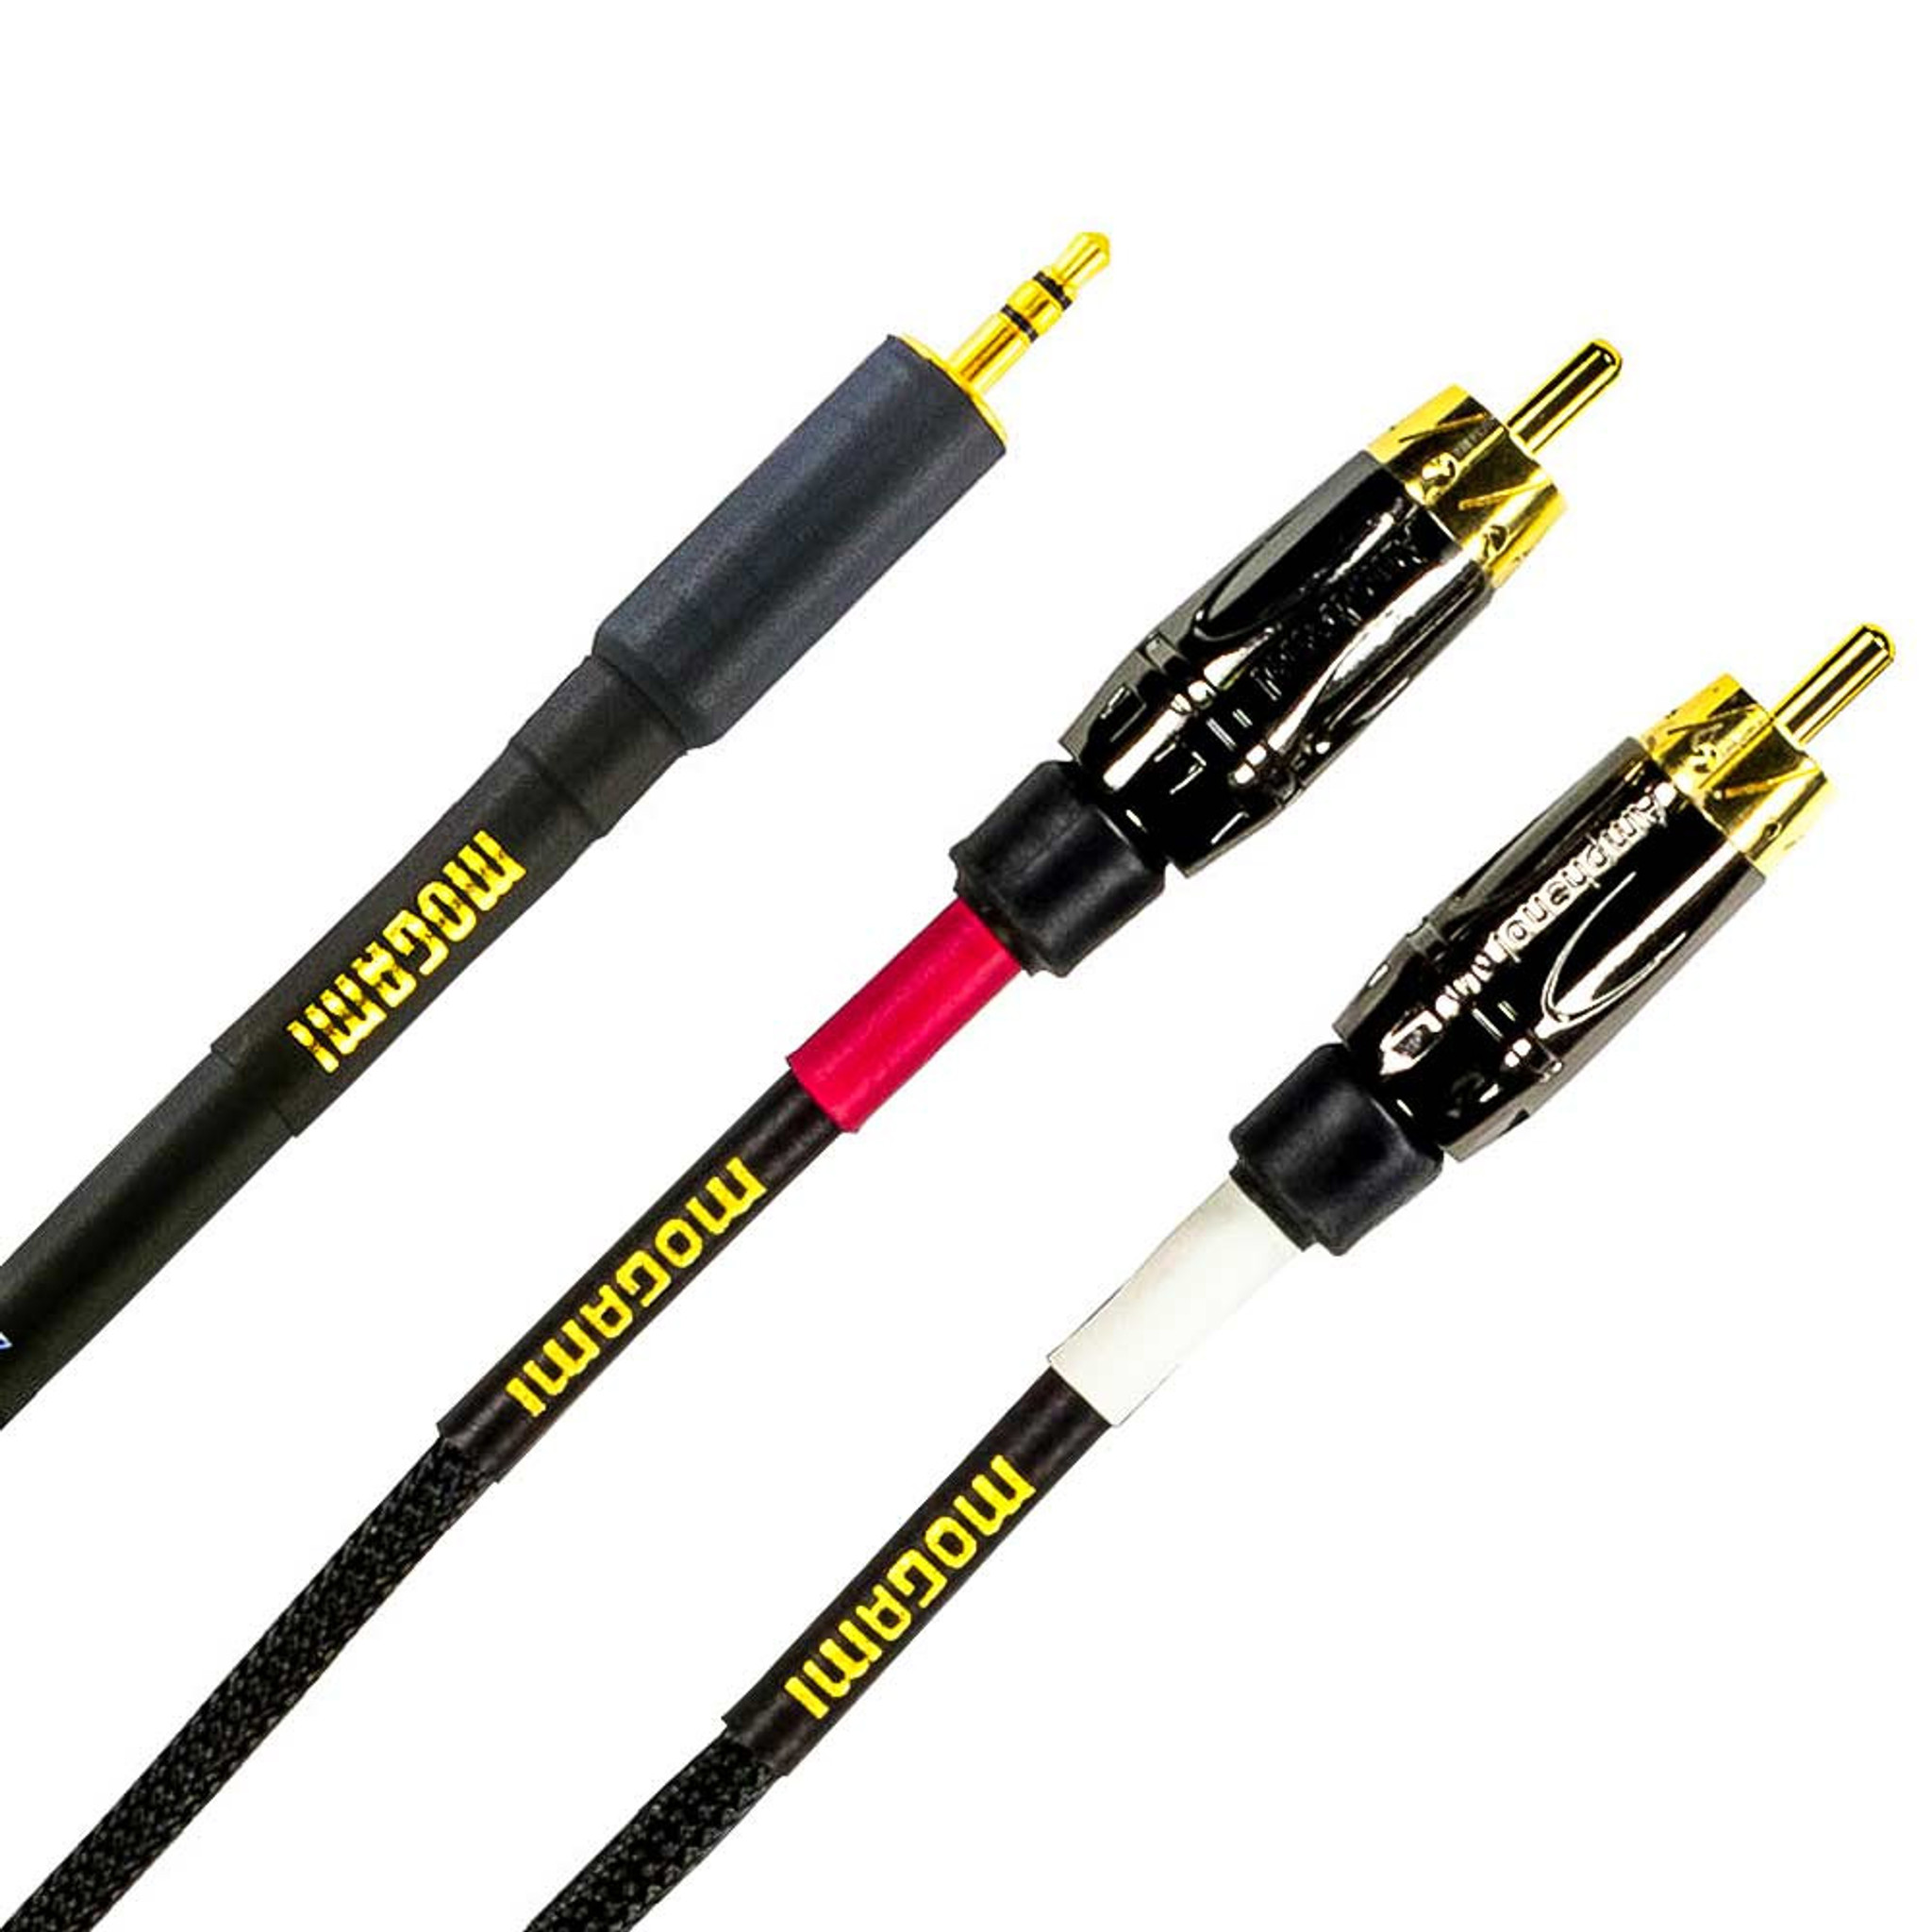 Mogami Gold RCA-RCA Cable - 6 foot